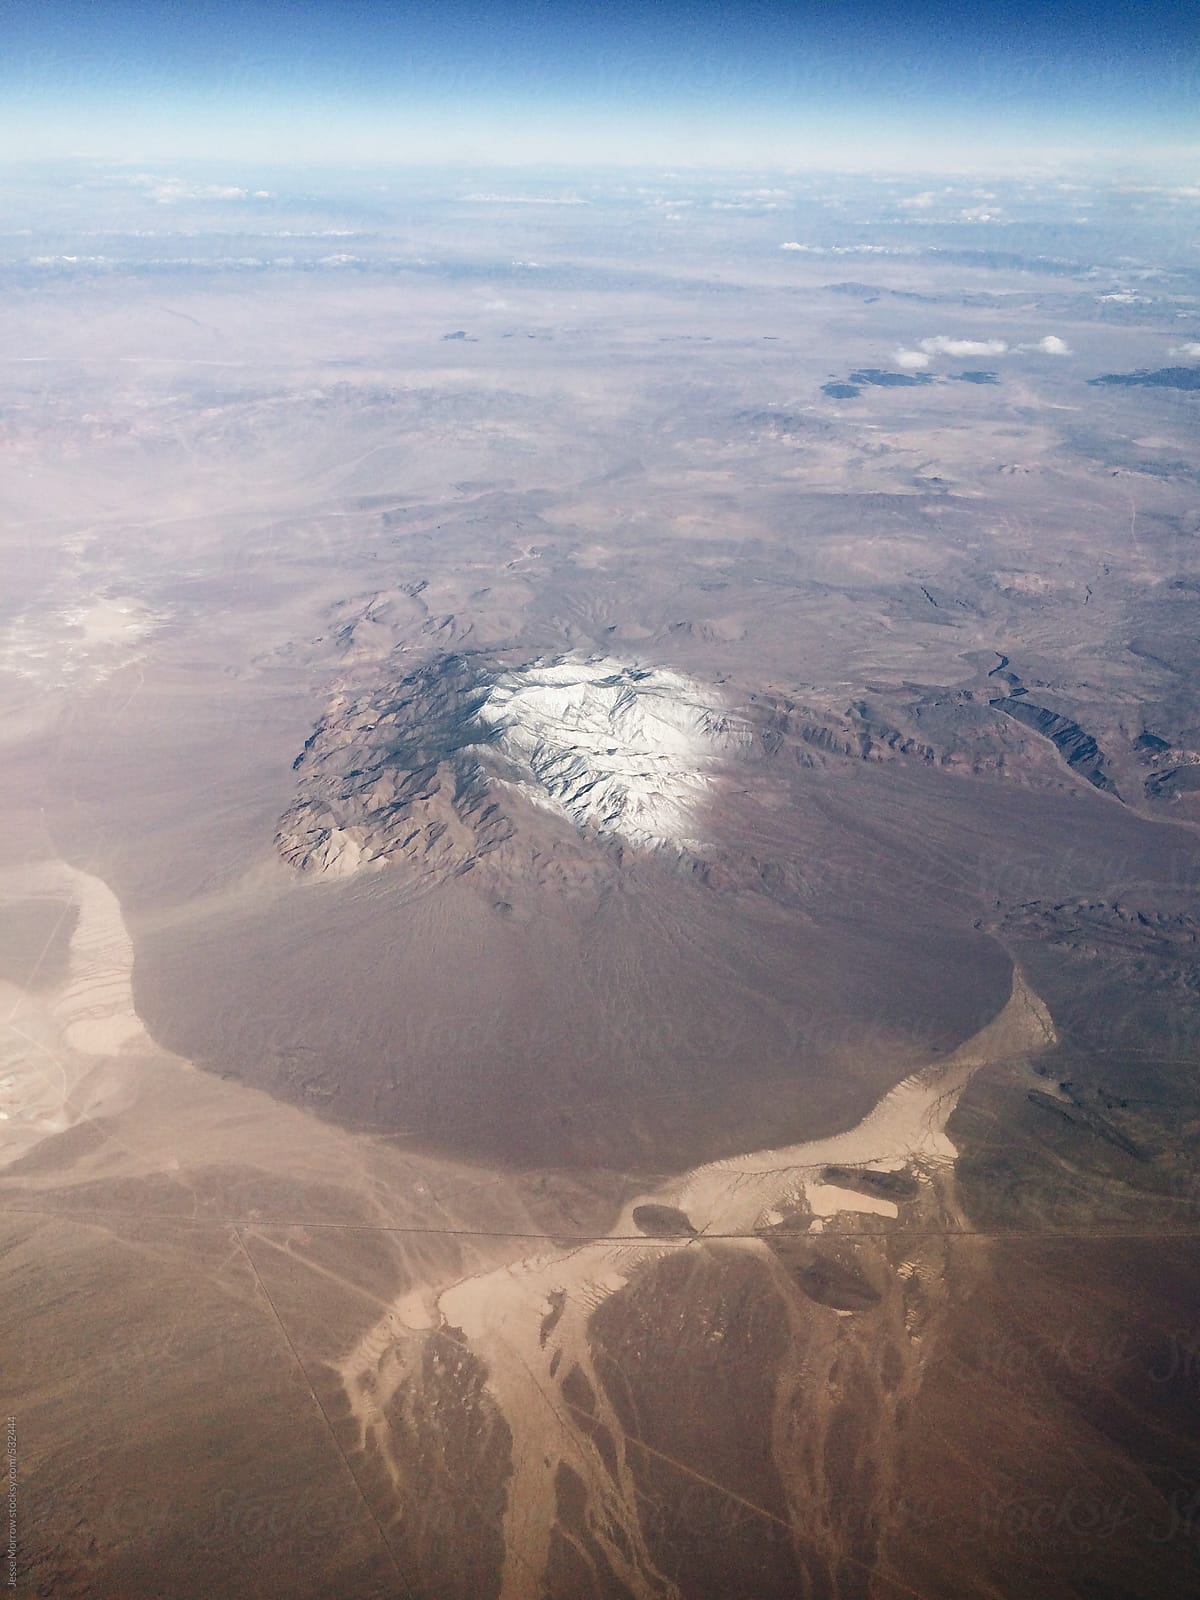 View of desert from high above the clouds in an airplane